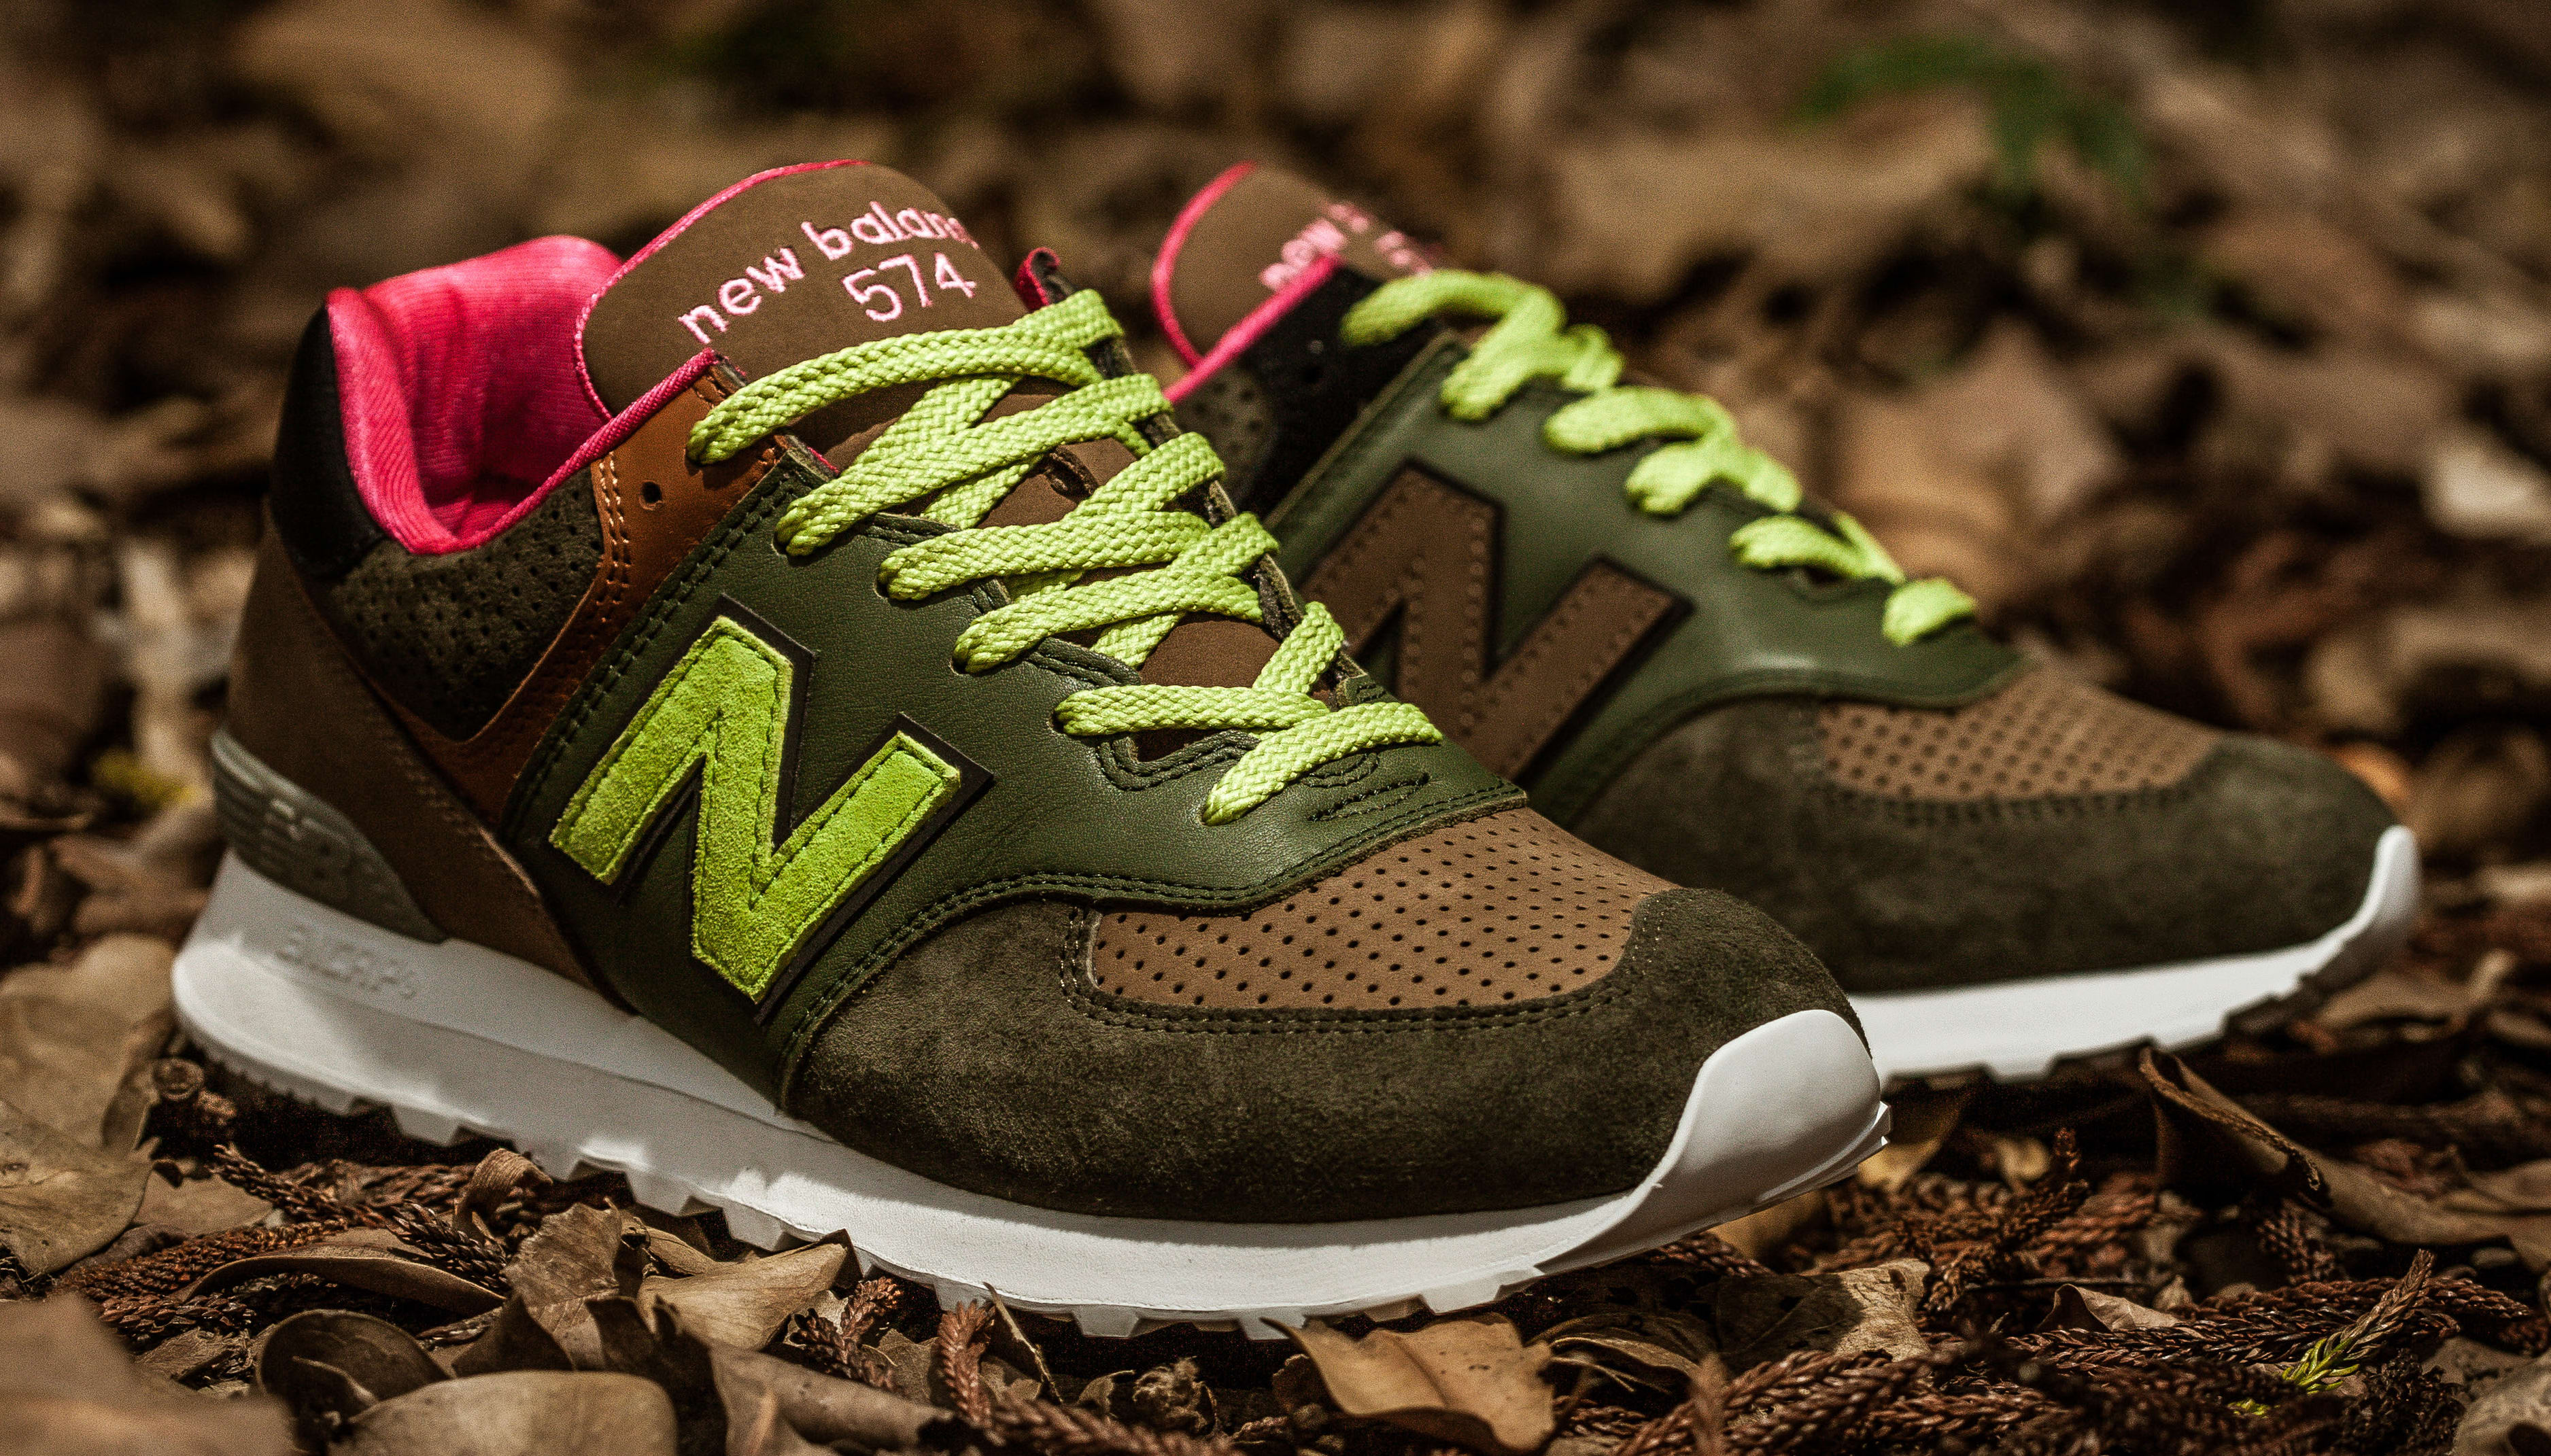 mita sneakers x whiz limited x new balance 574 iconic collaboration